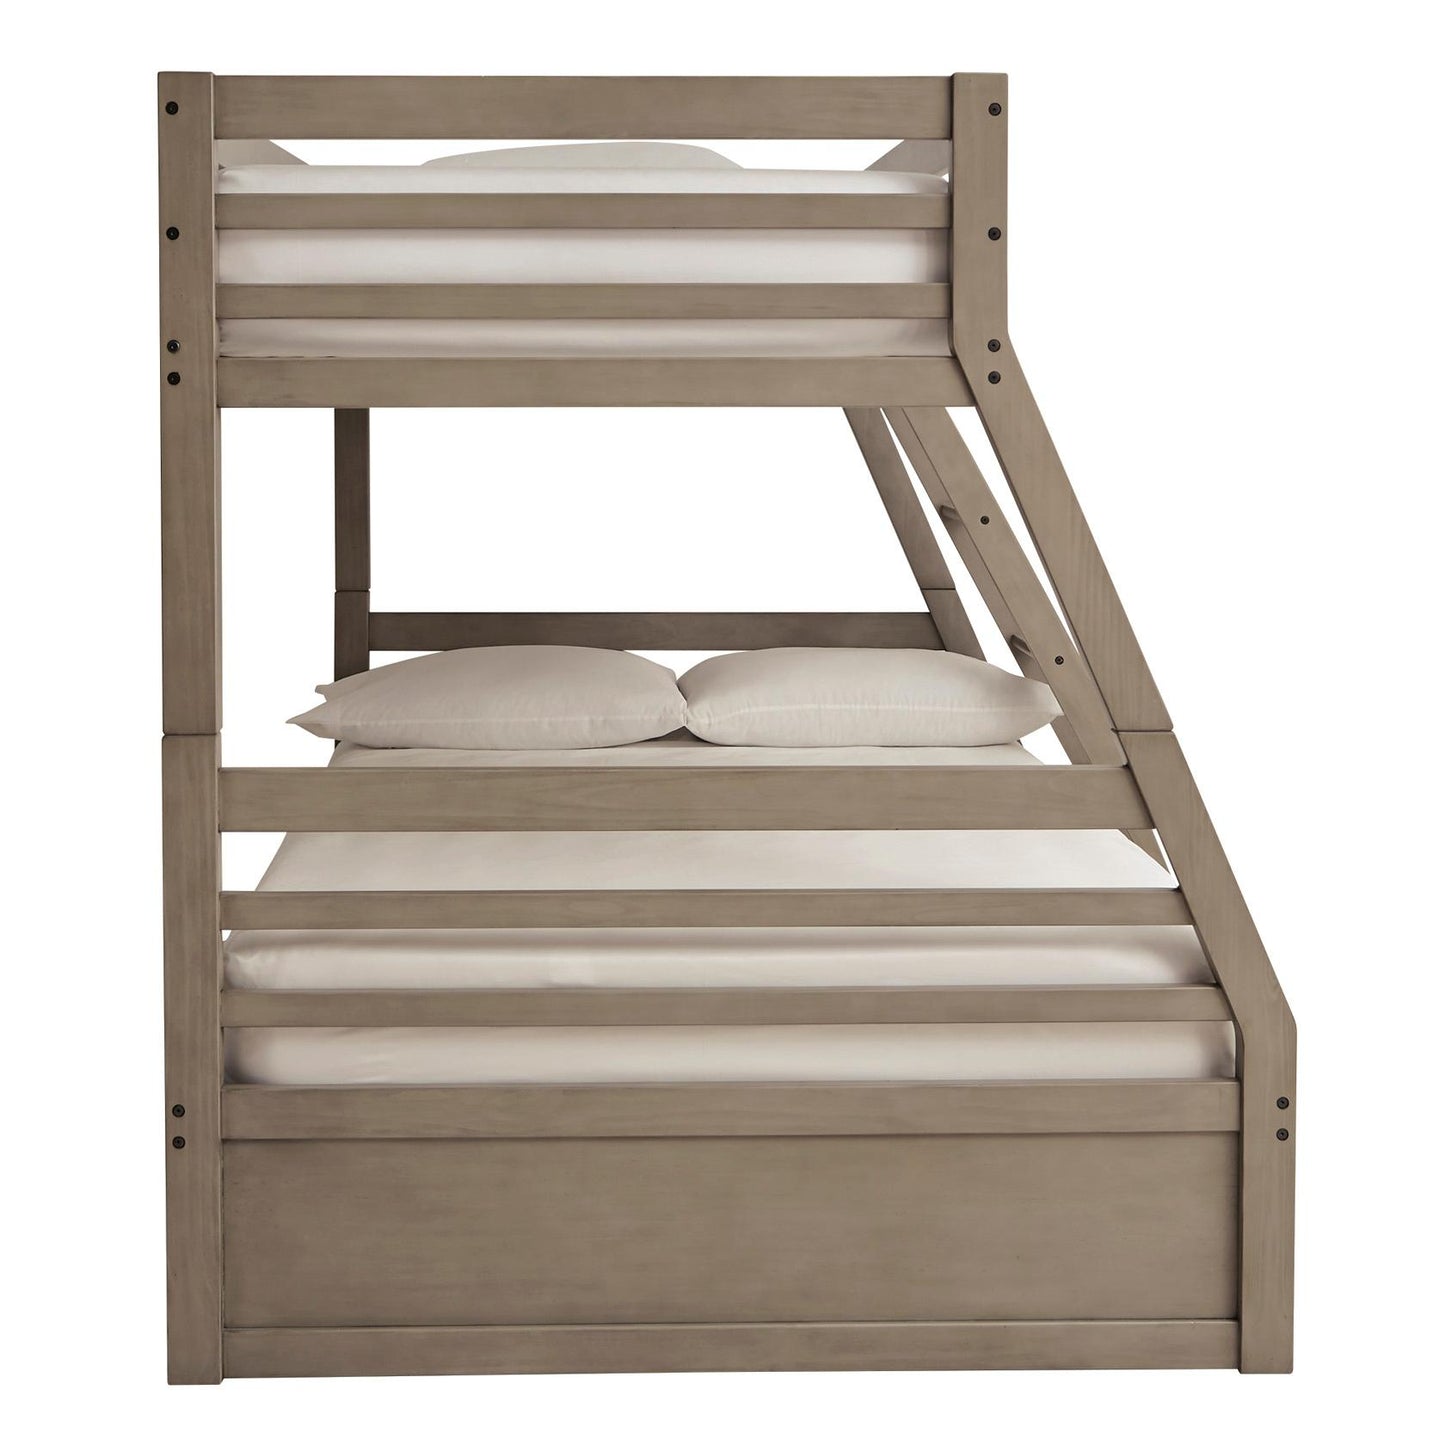 Signature Design by Ashley Kids Beds Bunk Bed B733-58P/B733-58R IMAGE 3